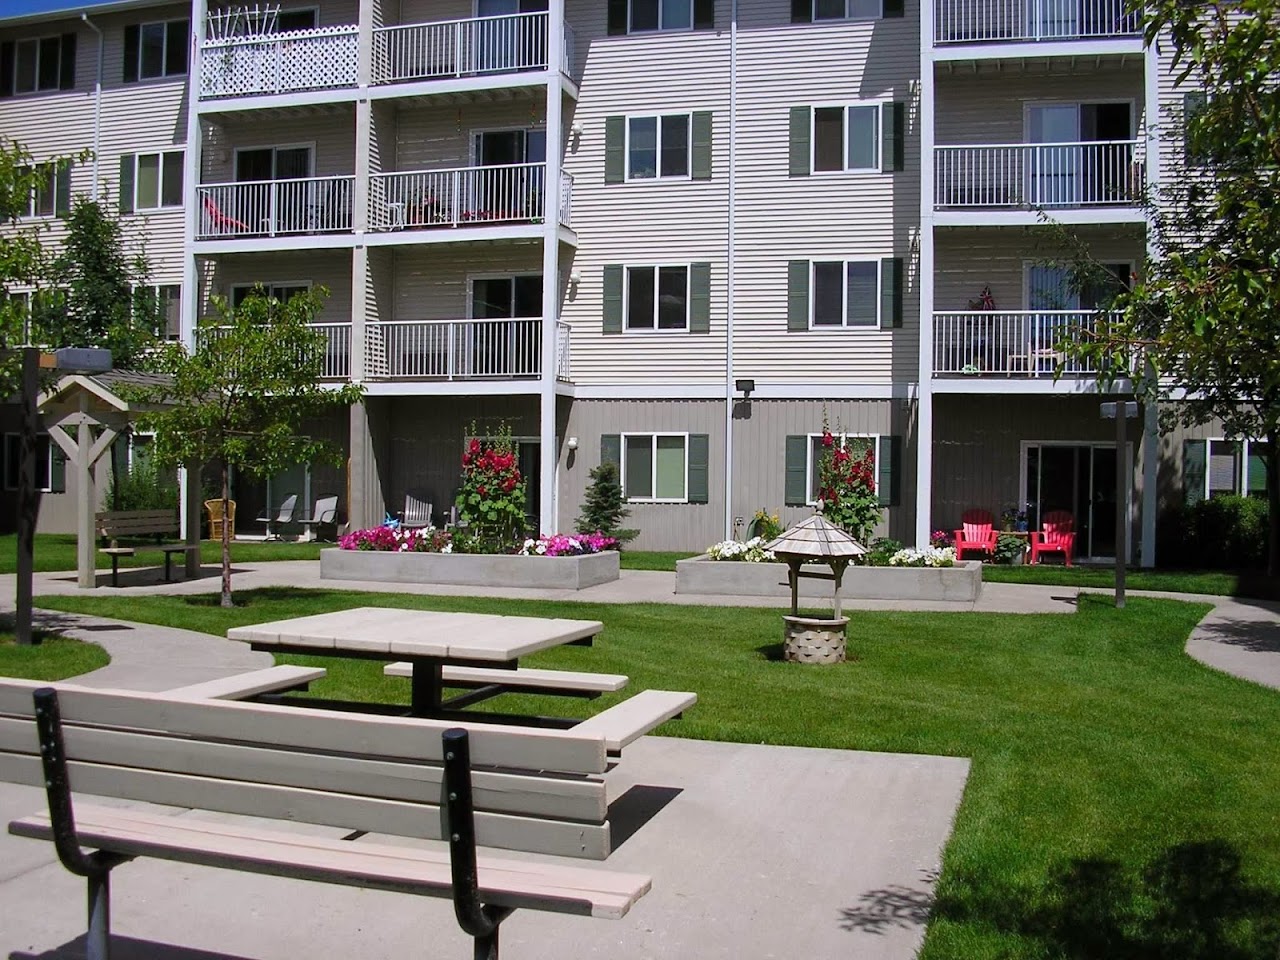 Photo of VINTAGE AT BEND. Affordable housing located at 611 NE BELLEVUE DR BEND, OR 97701